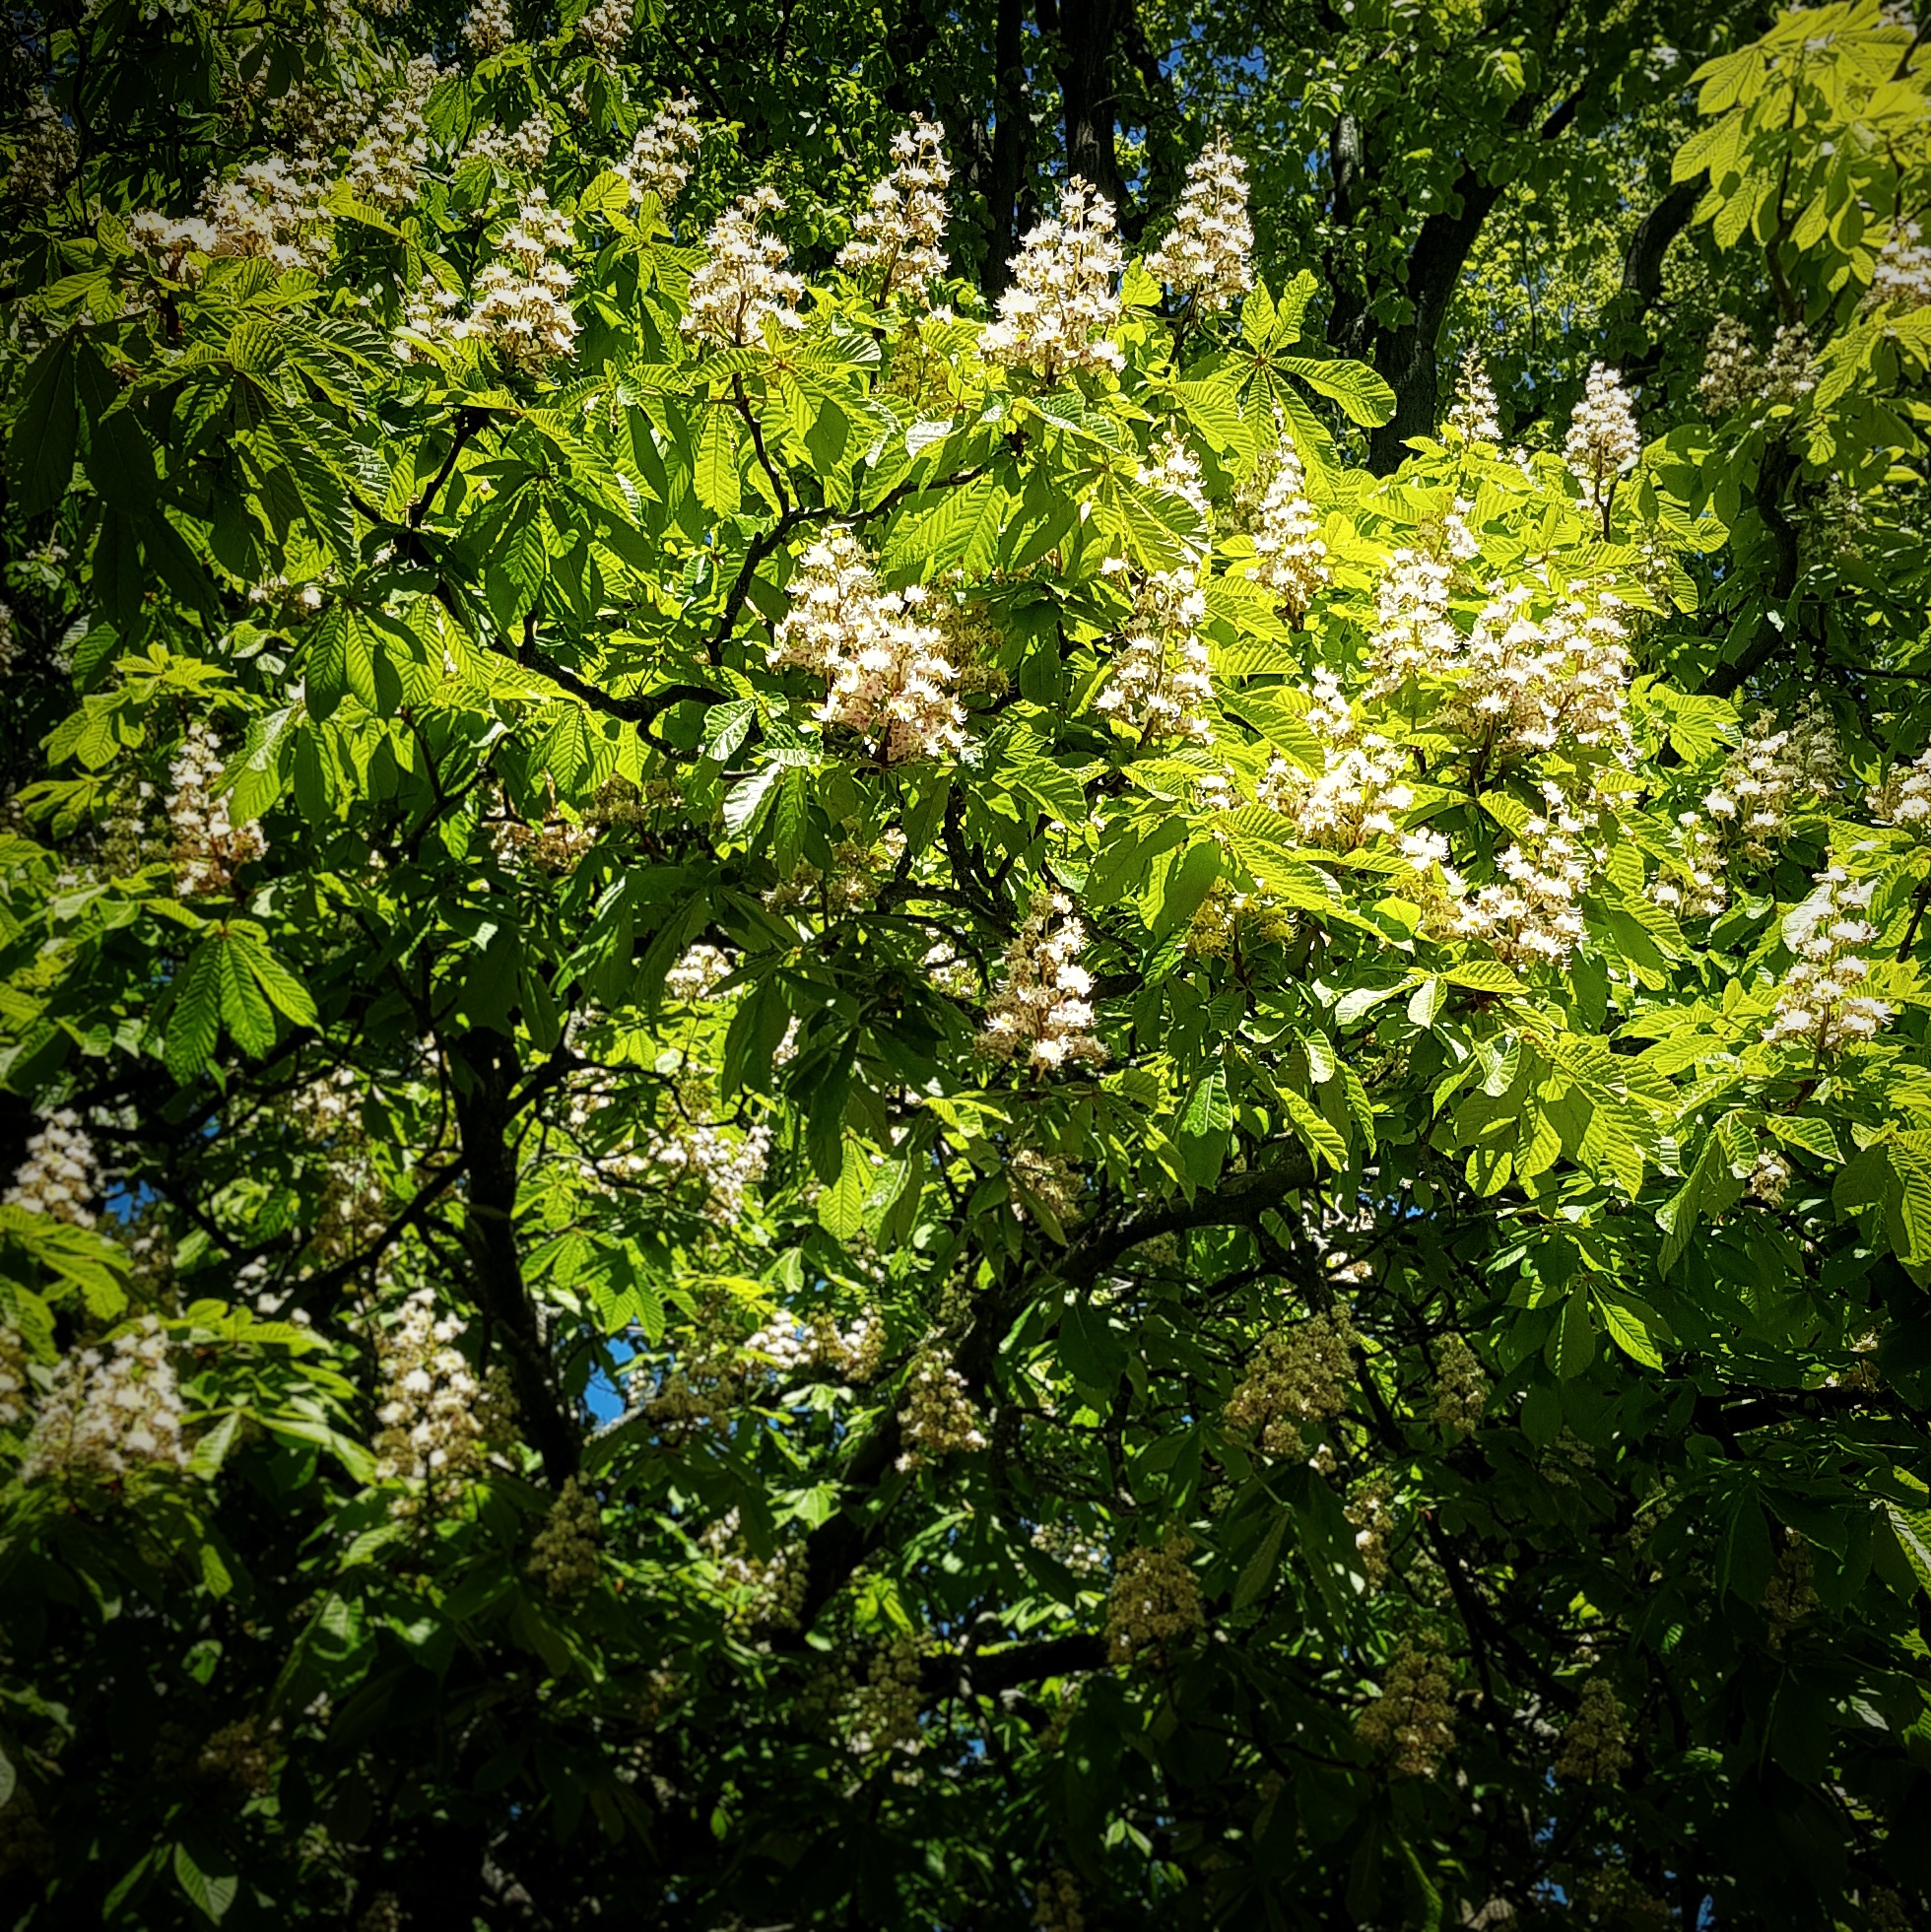 Day 131 - May 11: Chestnut in bloom